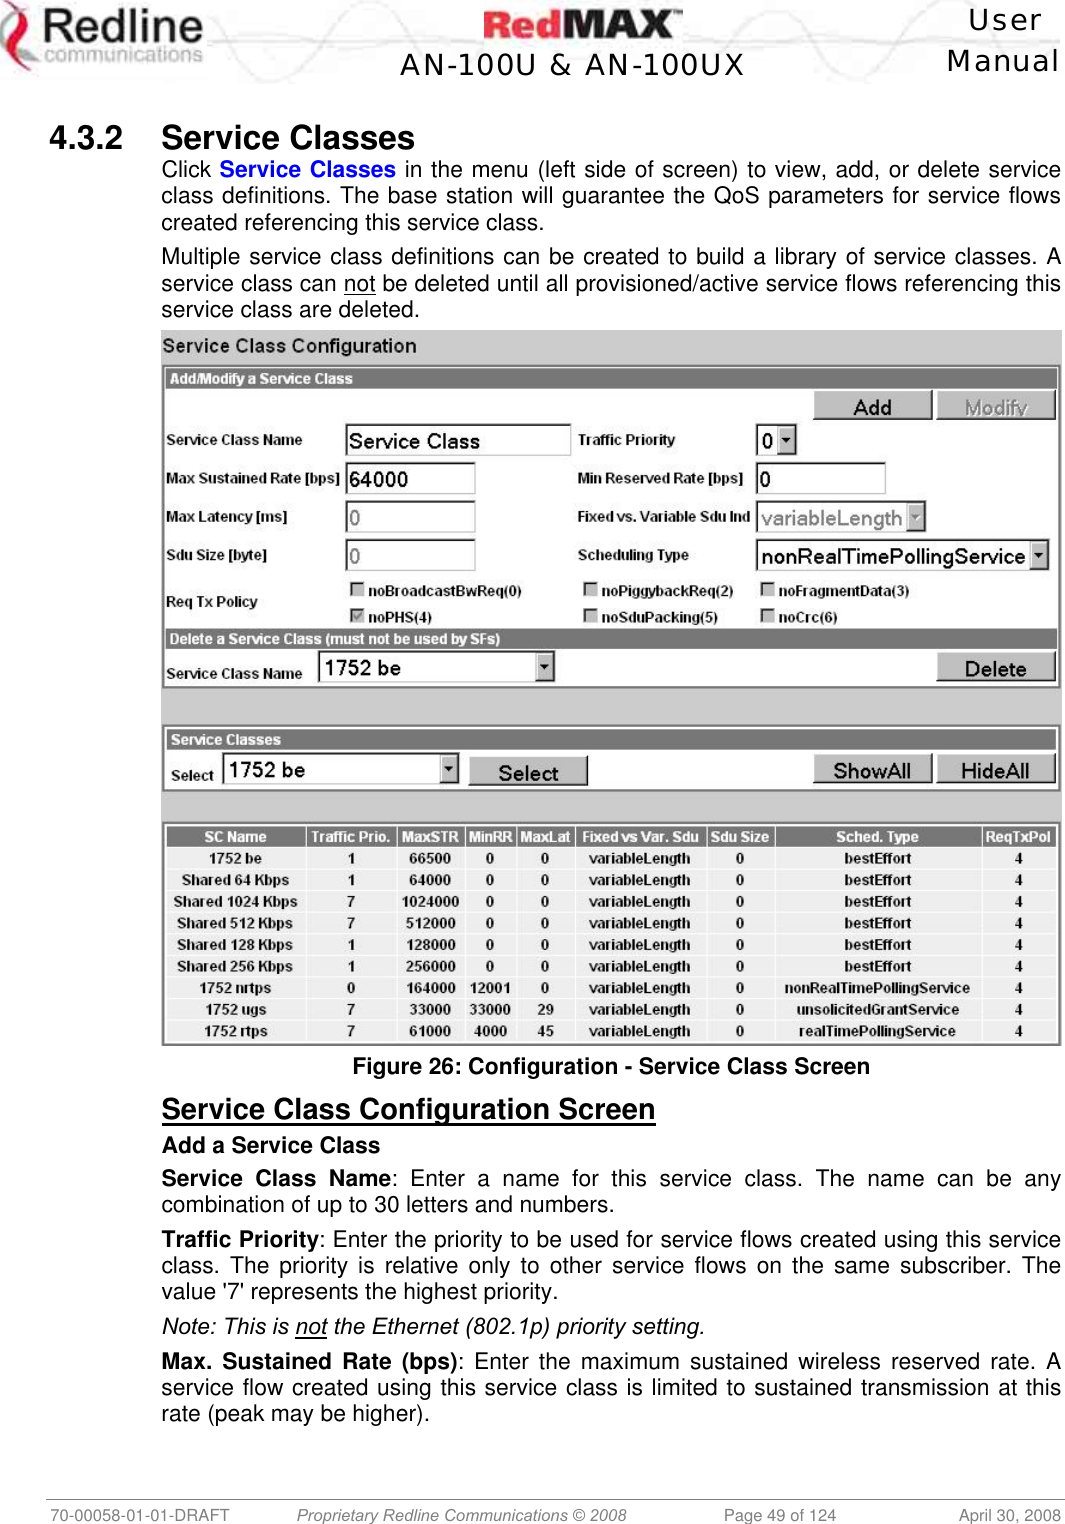    User  AN-100U &amp; AN-100UX Manual   70-00058-01-01-DRAFT  Proprietary Redline Communications © 2008   Page 49 of 124  April 30, 2008  4.3.2 Service Classes Click Service Classes in the menu (left side of screen) to view, add, or delete service class definitions. The base station will guarantee the QoS parameters for service flows created referencing this service class. Multiple service class definitions can be created to build a library of service classes. A service class can not be deleted until all provisioned/active service flows referencing this service class are deleted.  Figure 26: Configuration - Service Class Screen Service Class Configuration Screen Add a Service Class Service Class Name: Enter a name for this service class. The name can be any combination of up to 30 letters and numbers. Traffic Priority: Enter the priority to be used for service flows created using this service class. The priority is relative only to other service flows on the same subscriber. The value &apos;7&apos; represents the highest priority. Note: This is not the Ethernet (802.1p) priority setting. Max. Sustained Rate (bps): Enter the maximum sustained wireless reserved rate. A service flow created using this service class is limited to sustained transmission at this rate (peak may be higher).  